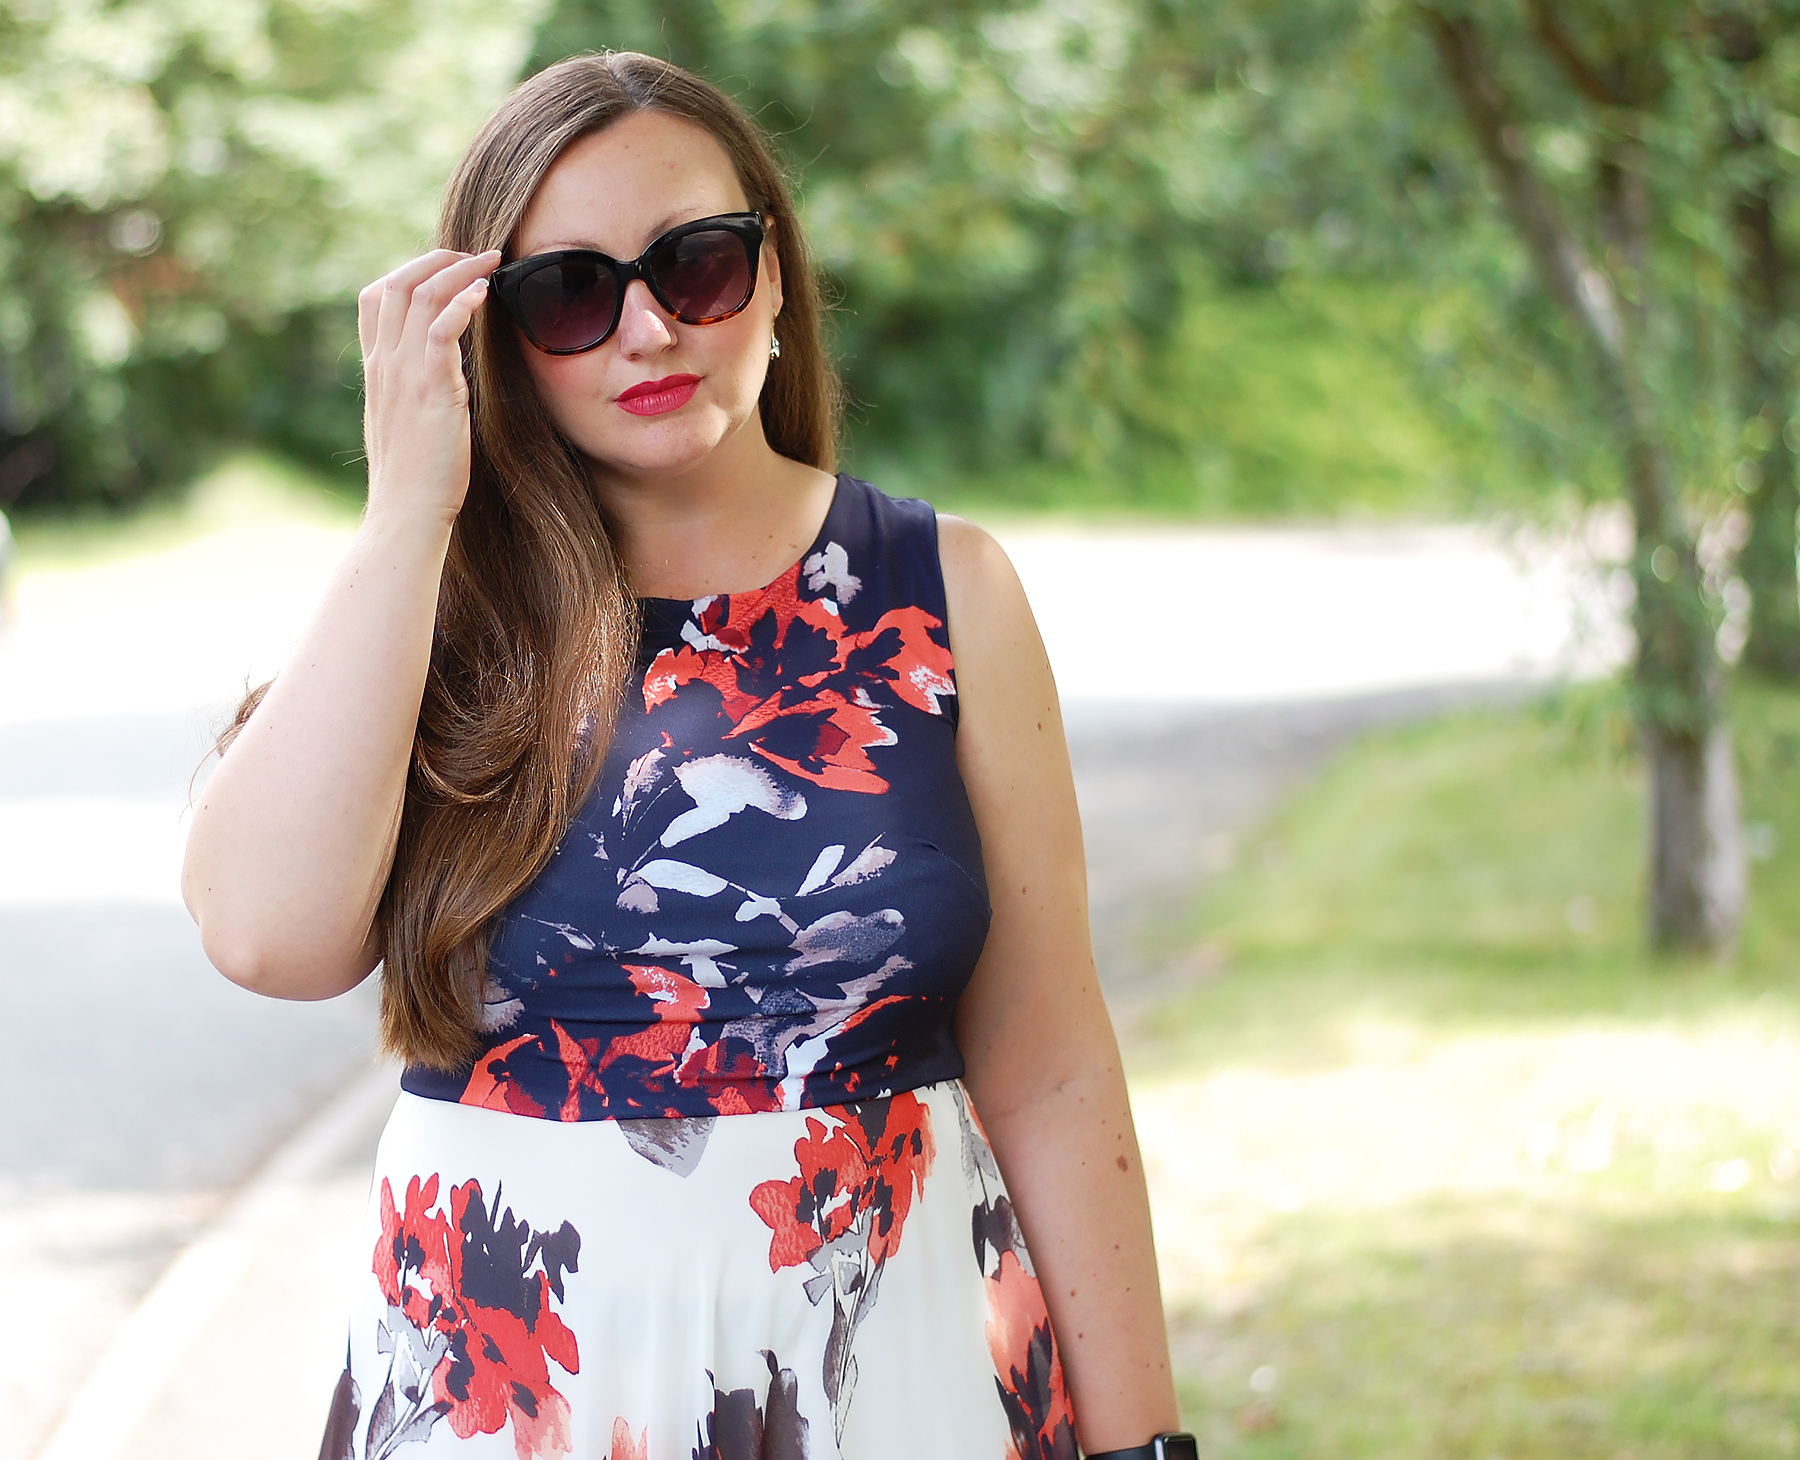 Arty Floral Print Dress Outfit